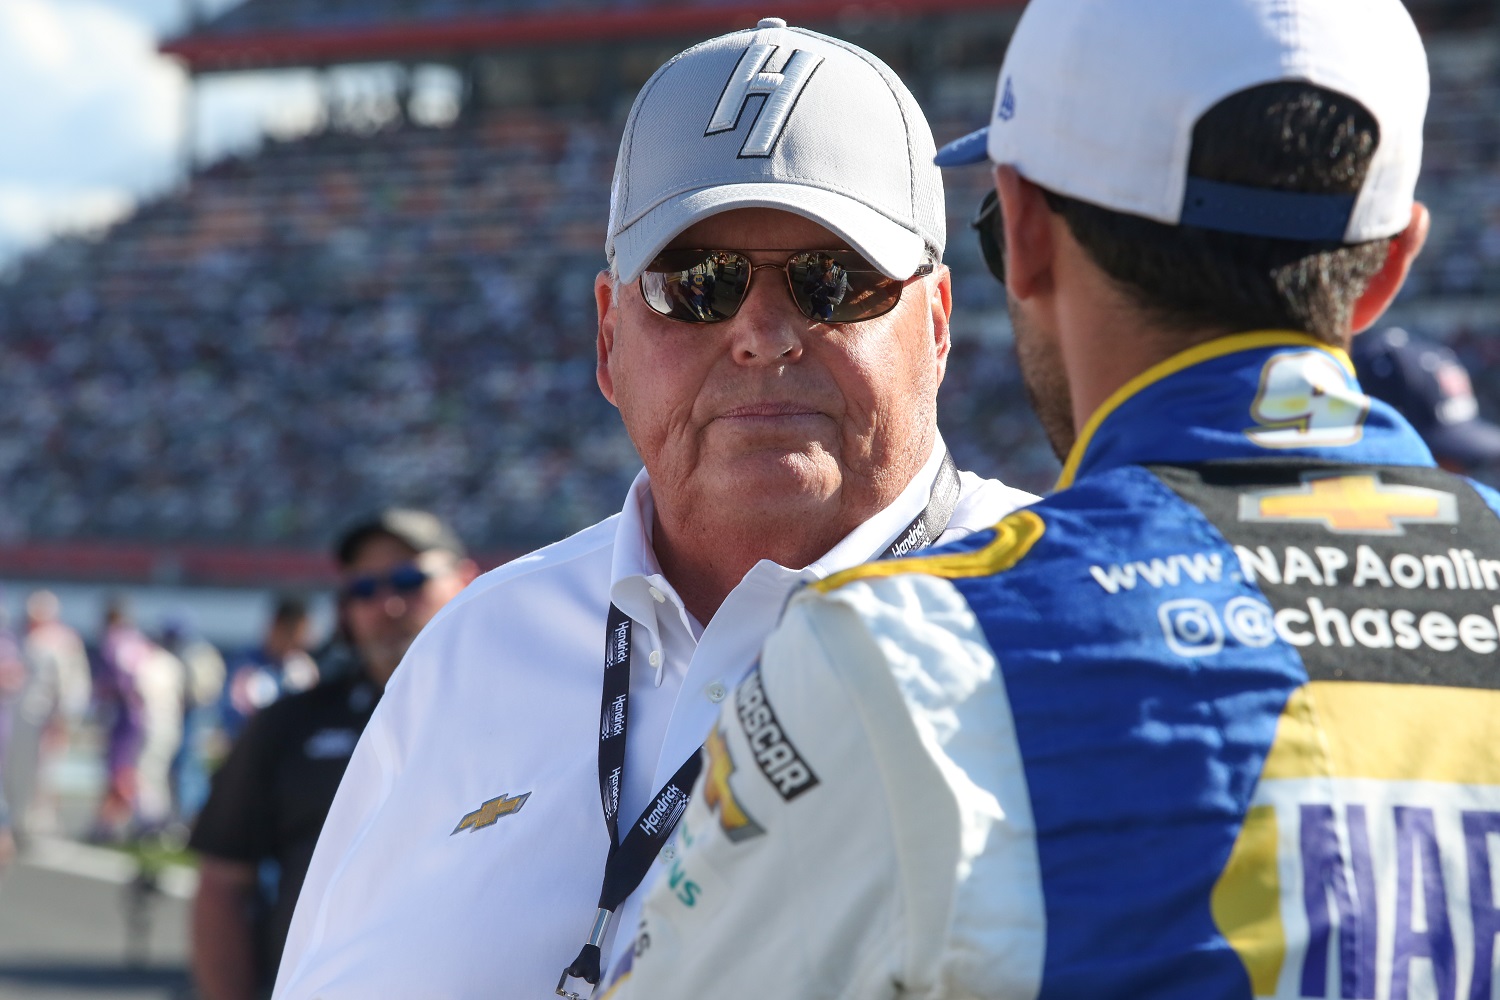 Rick Hendrick talks with Chase Elliott, driver of the No. 9 Chevrolet, before the Coca-Cola 600 on May 30, 2021 at Charlotte Motor Speedway in Concord, North Carolina. | David Rosenblum/Icon Sportswire via Getty Images